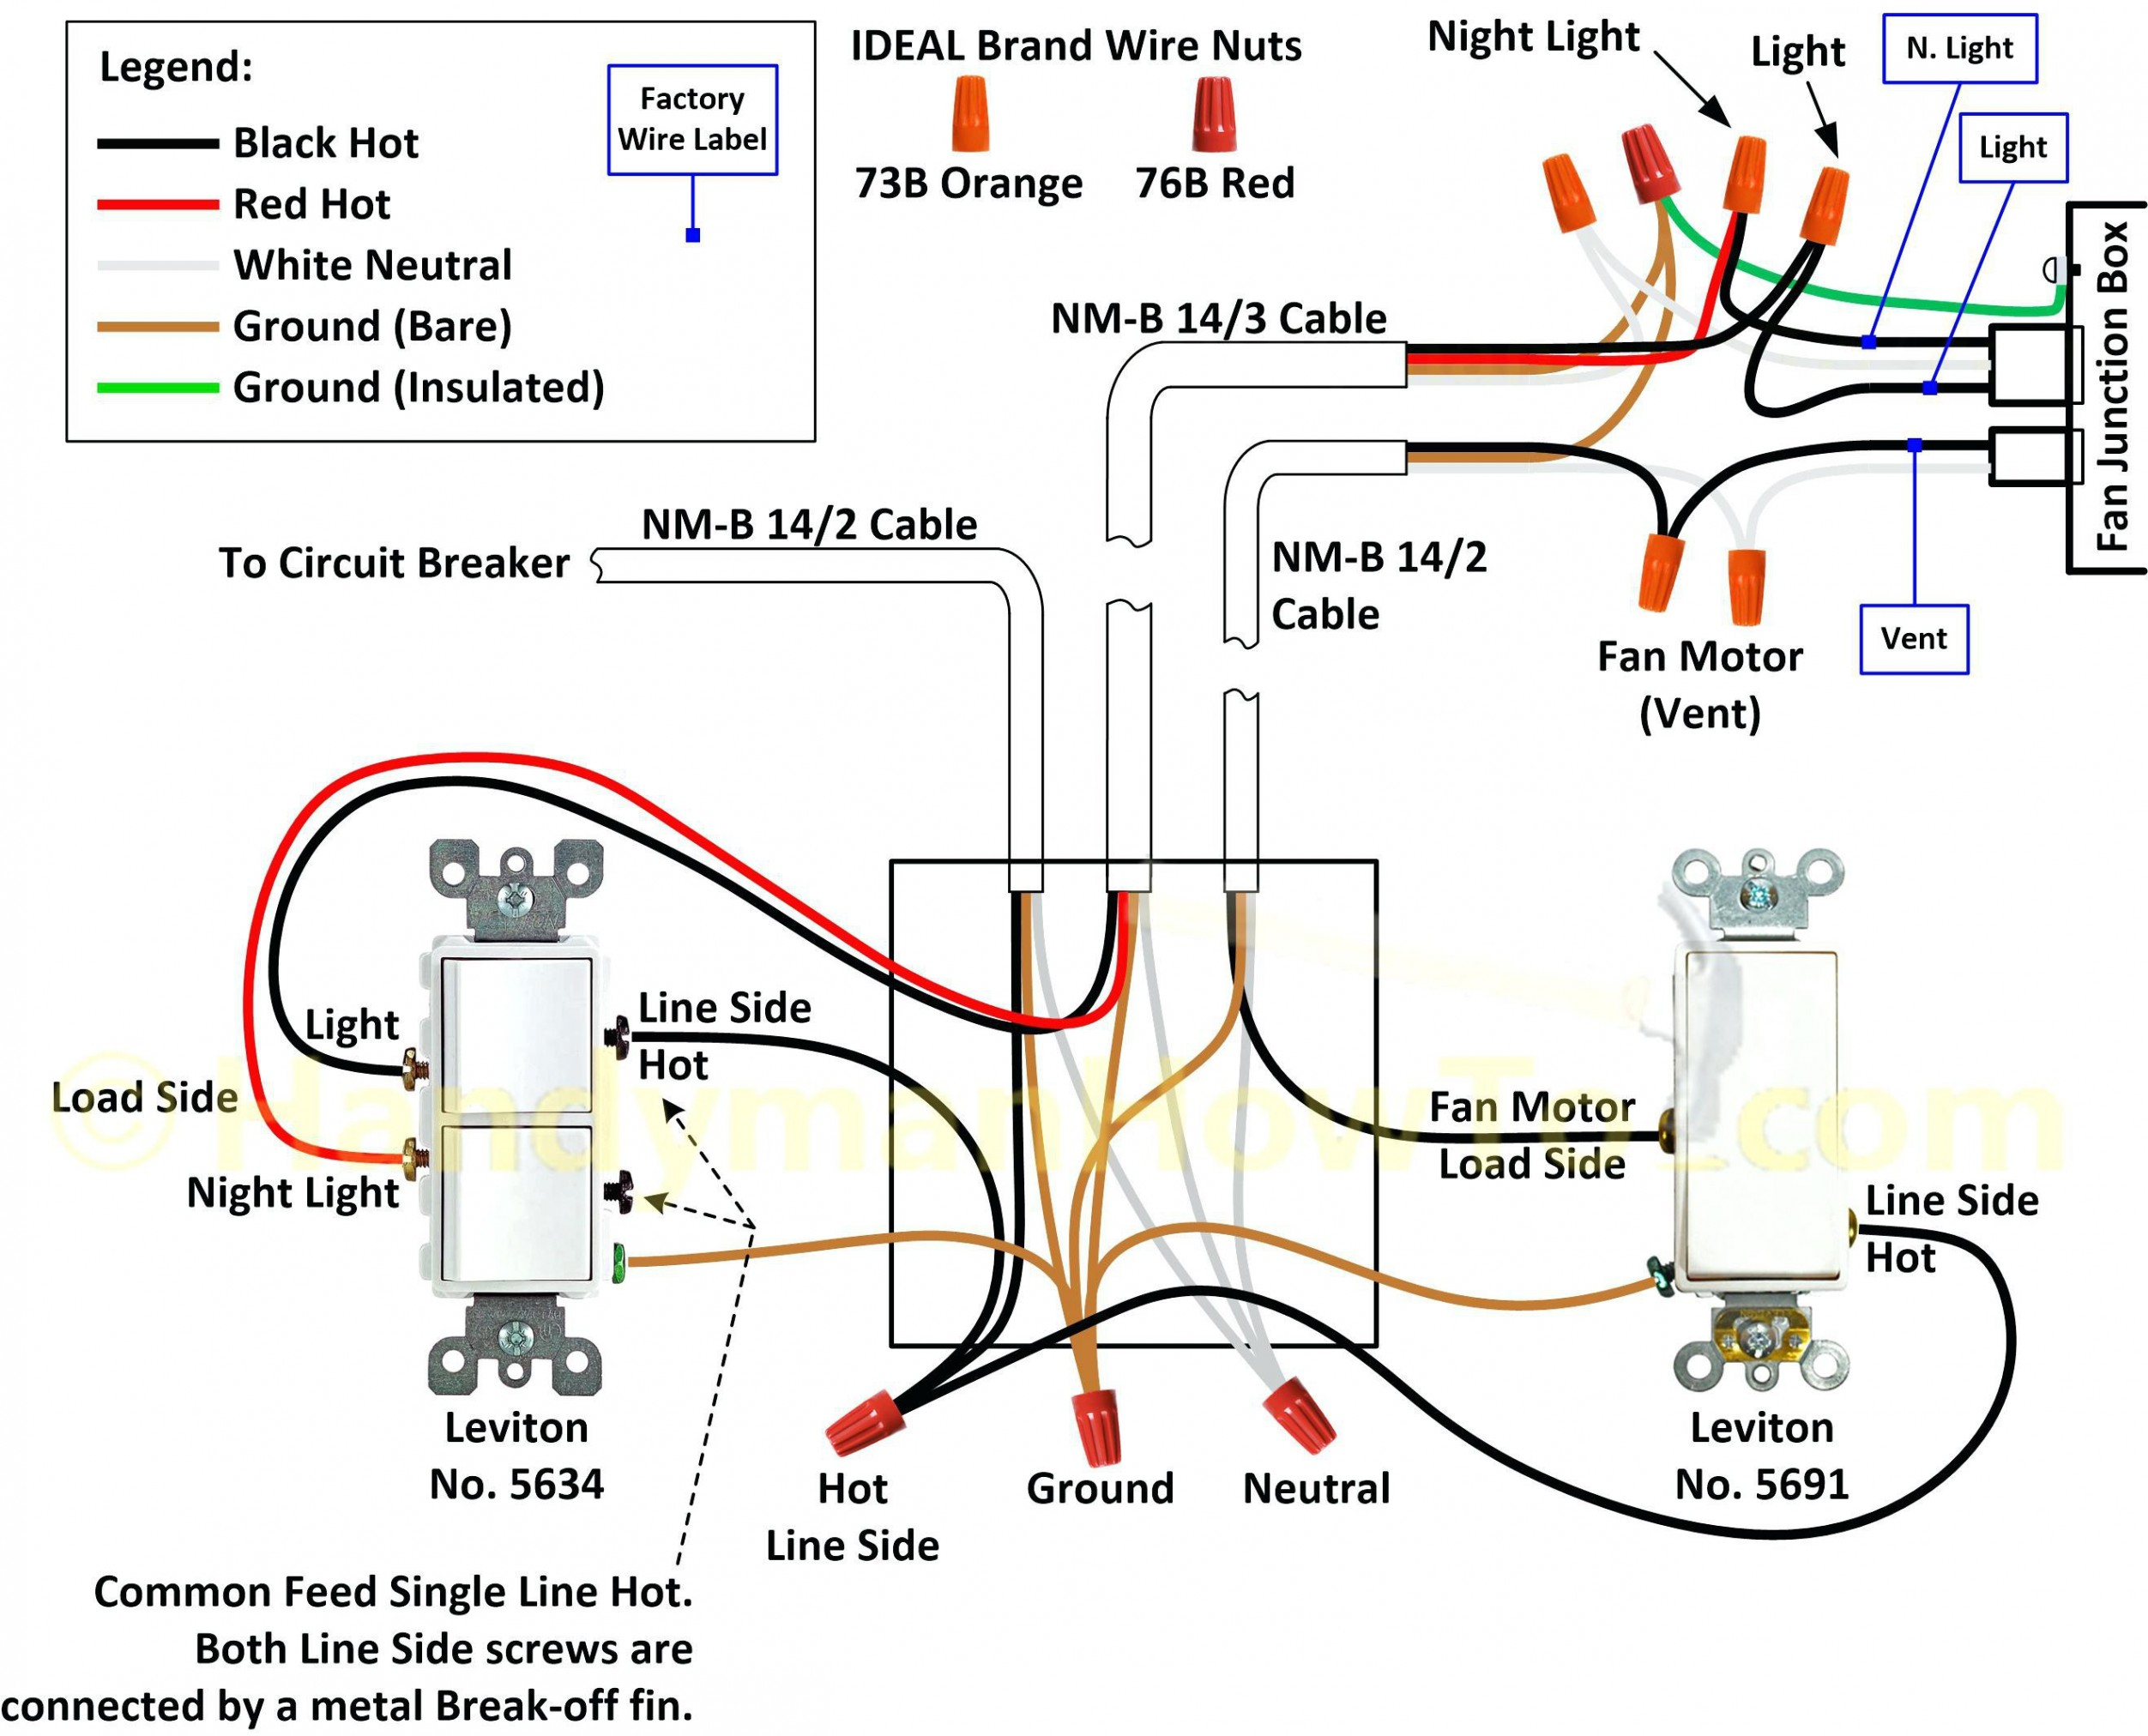 Double Pole Switch Wiring Diagram – Double Pole Switch Wiring - Double Pole Switch Wiring Diagram